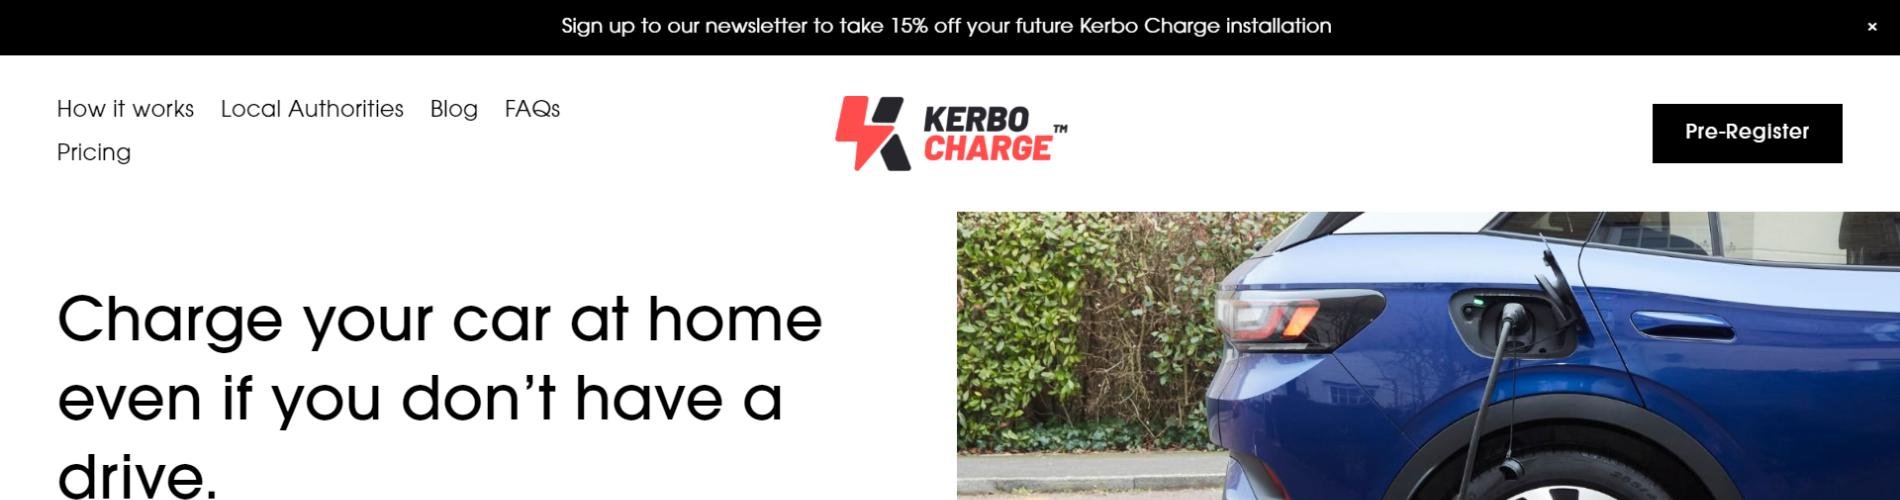 Kerbo Charge cover